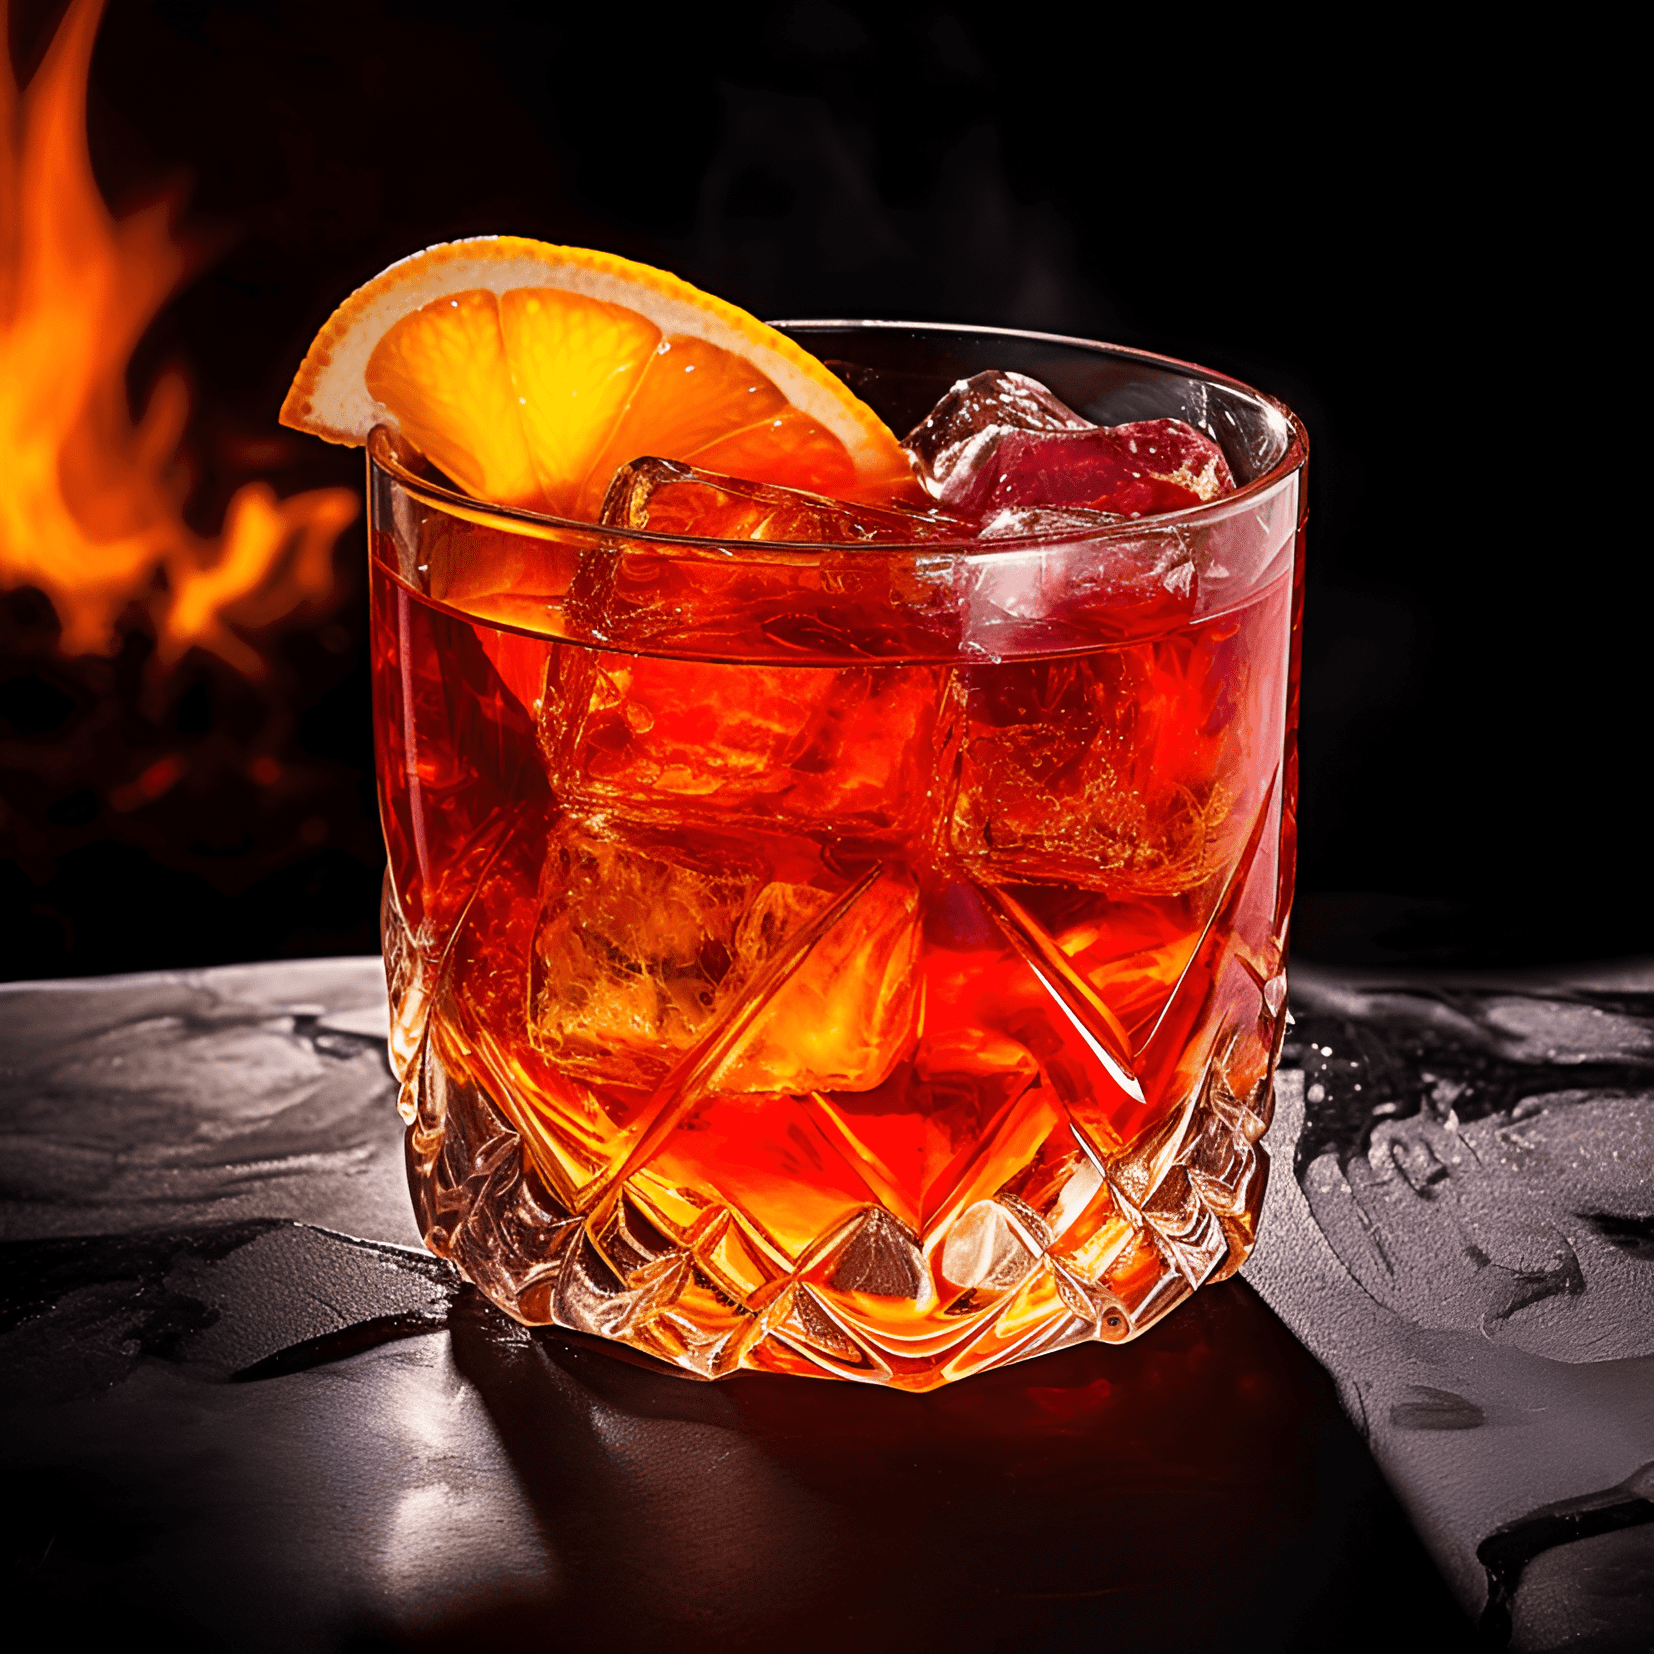 Creole Cocktail Recipe - The Creole cocktail is a complex and well-balanced drink, with a sweet and fruity base, a hint of bitterness from the Campari, and a warm, spicy finish from the rye whiskey. It is both refreshing and invigorating, making it a perfect choice for a warm summer evening or a lively night out.